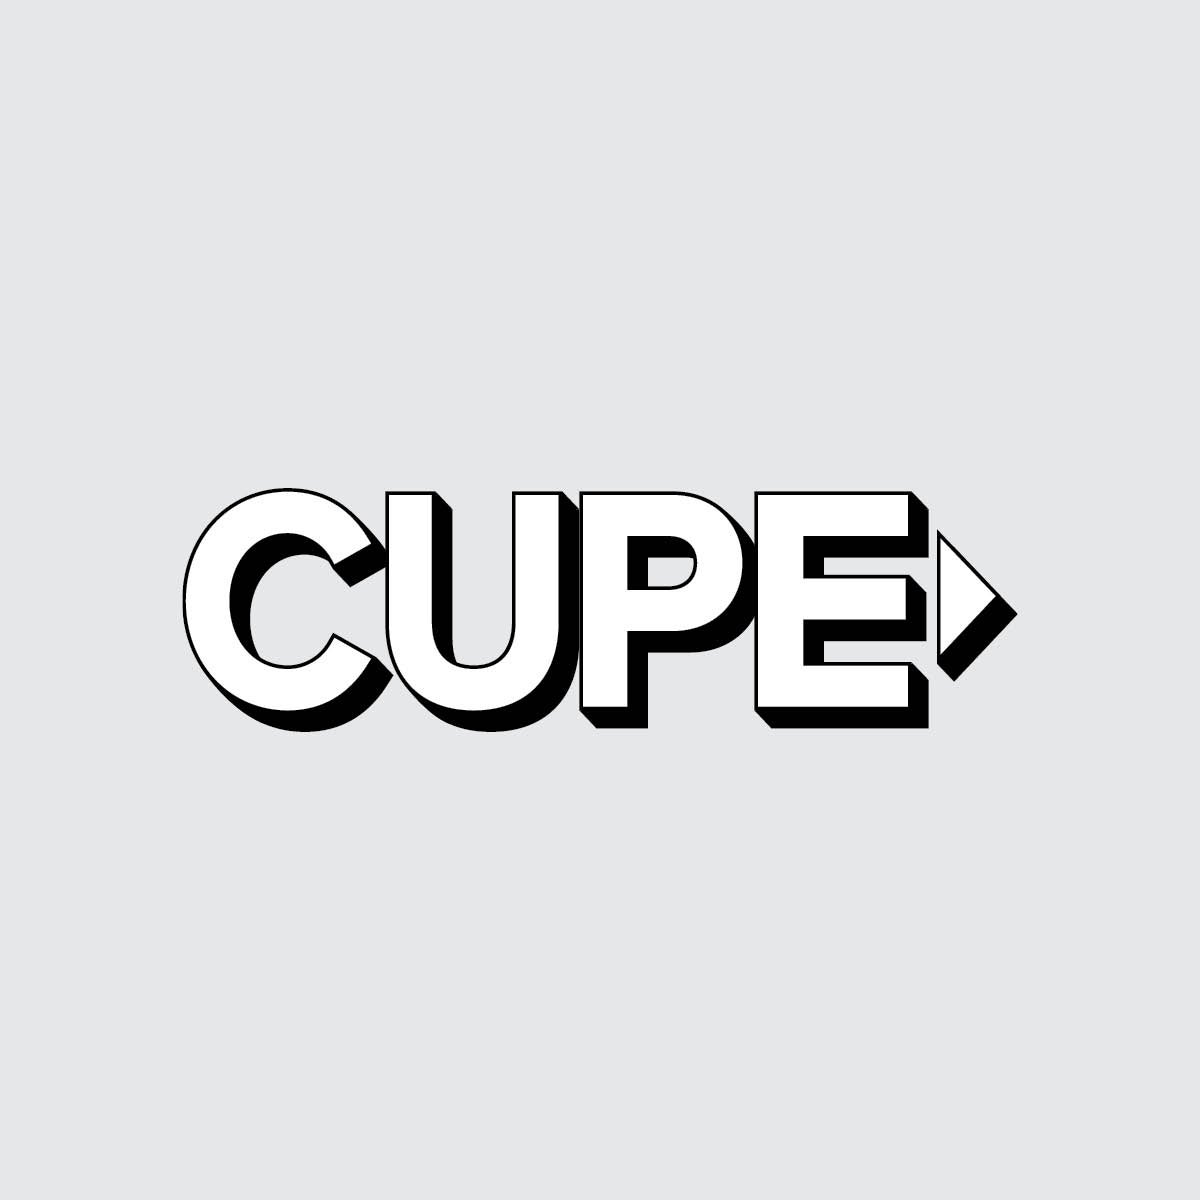 CUPE's forgotten logo